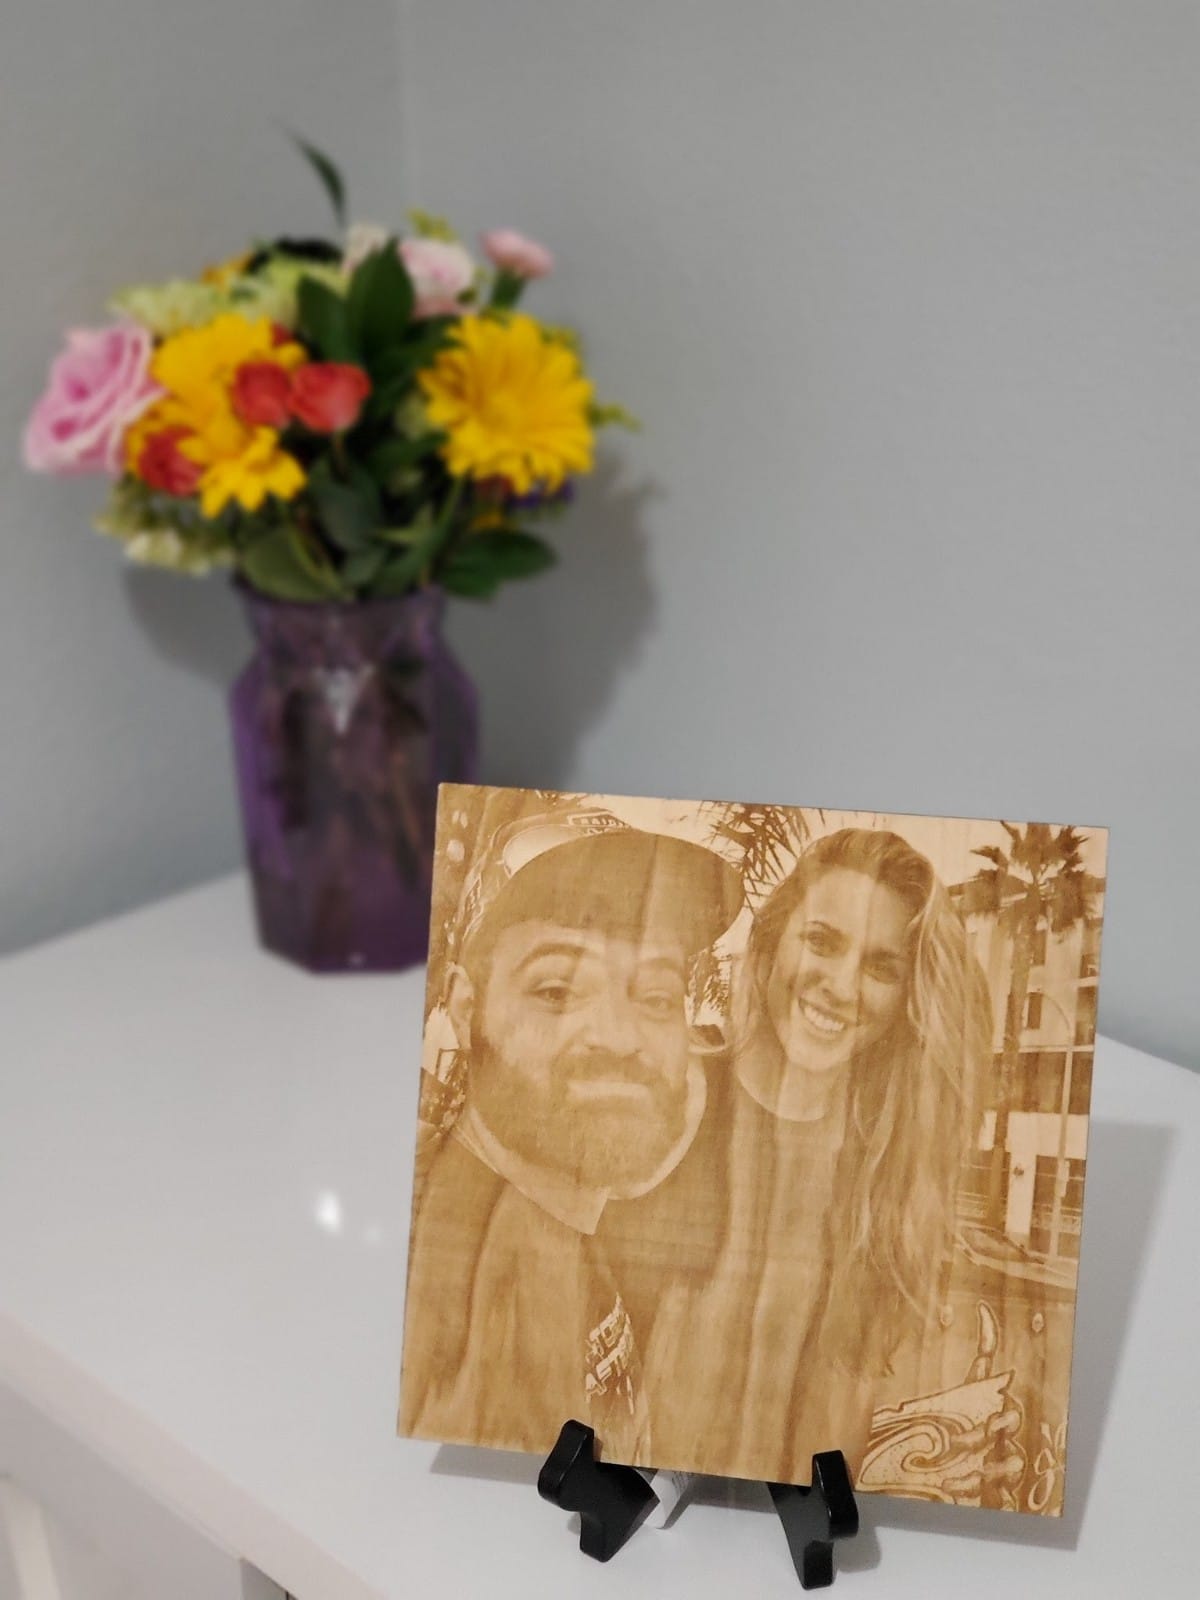 Custom Wood Engraved Photos - Premium Wood Plaques from Hipster Lasers - Just $35! Shop now at Hipsterlasers